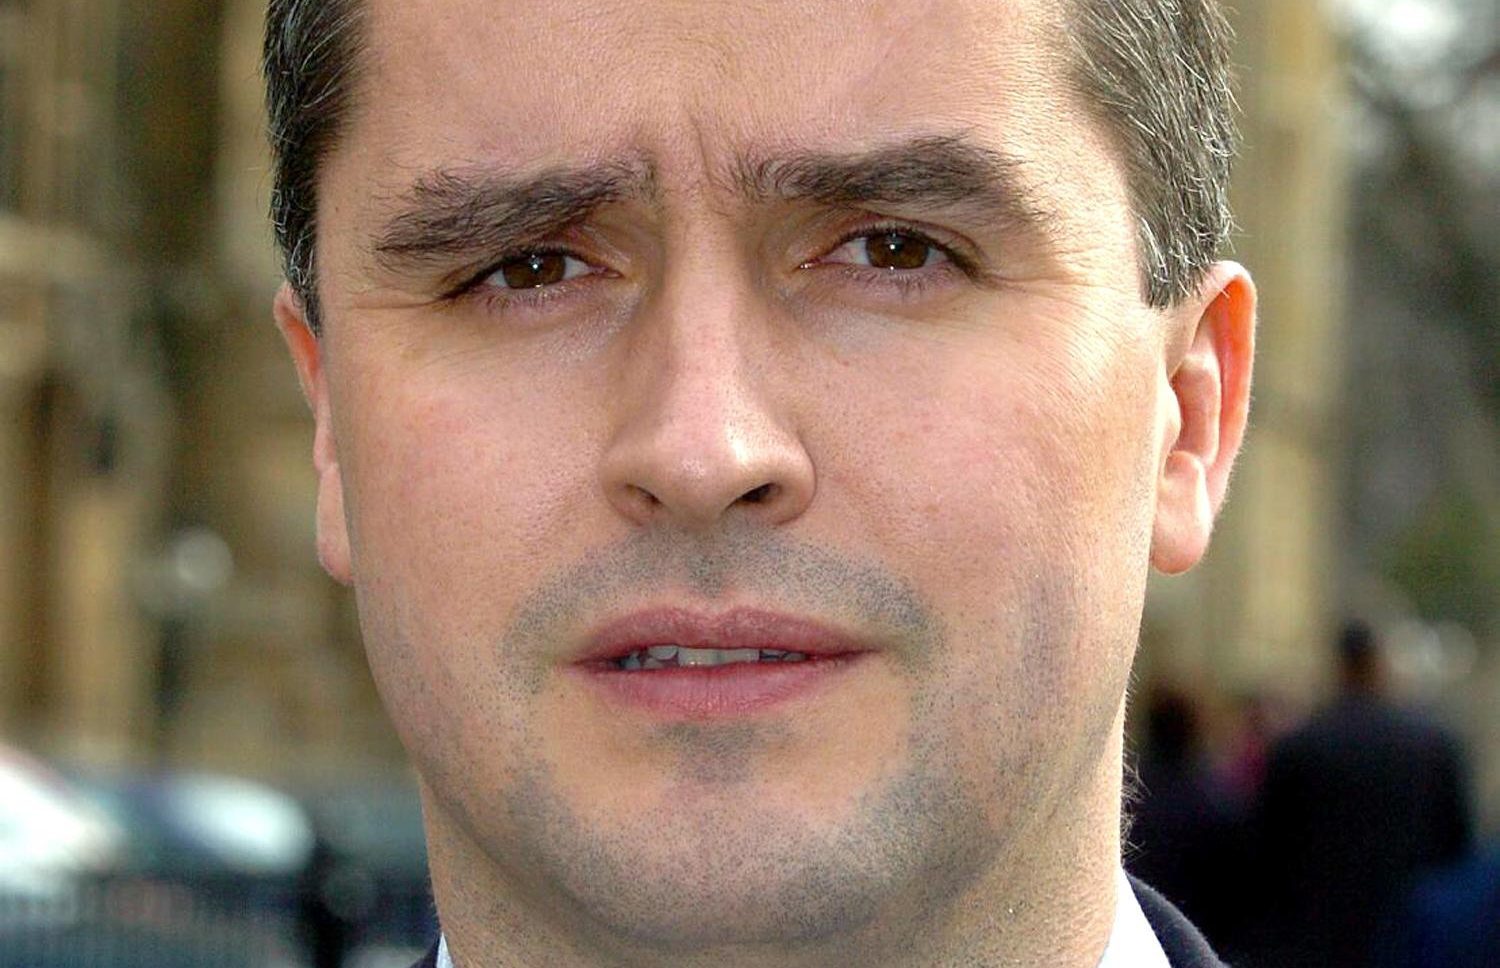 Angus MacNeil's expense claims came under scrutiny after reports of an affair with Westminster journalist Serena Cowdy became public.